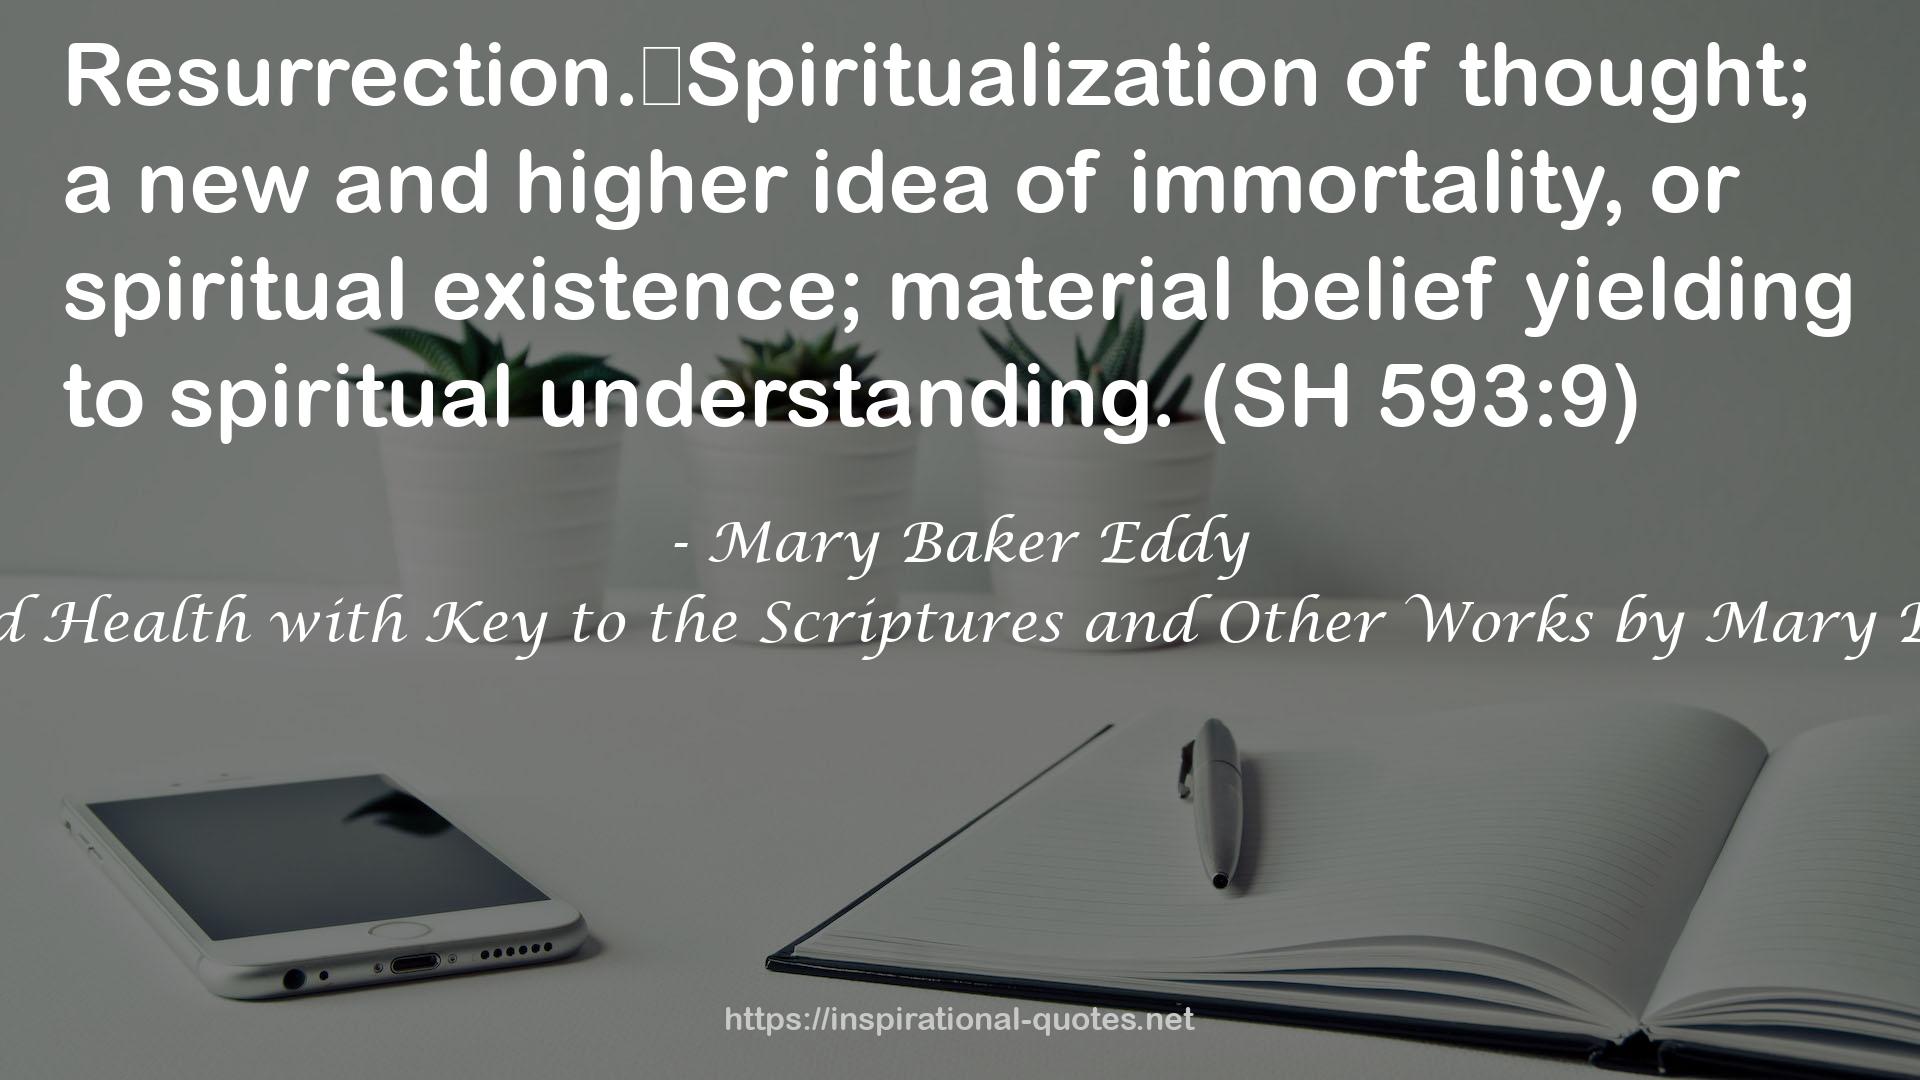 Science and Health with Key to the Scriptures and Other Works by Mary Baker Eddy QUOTES